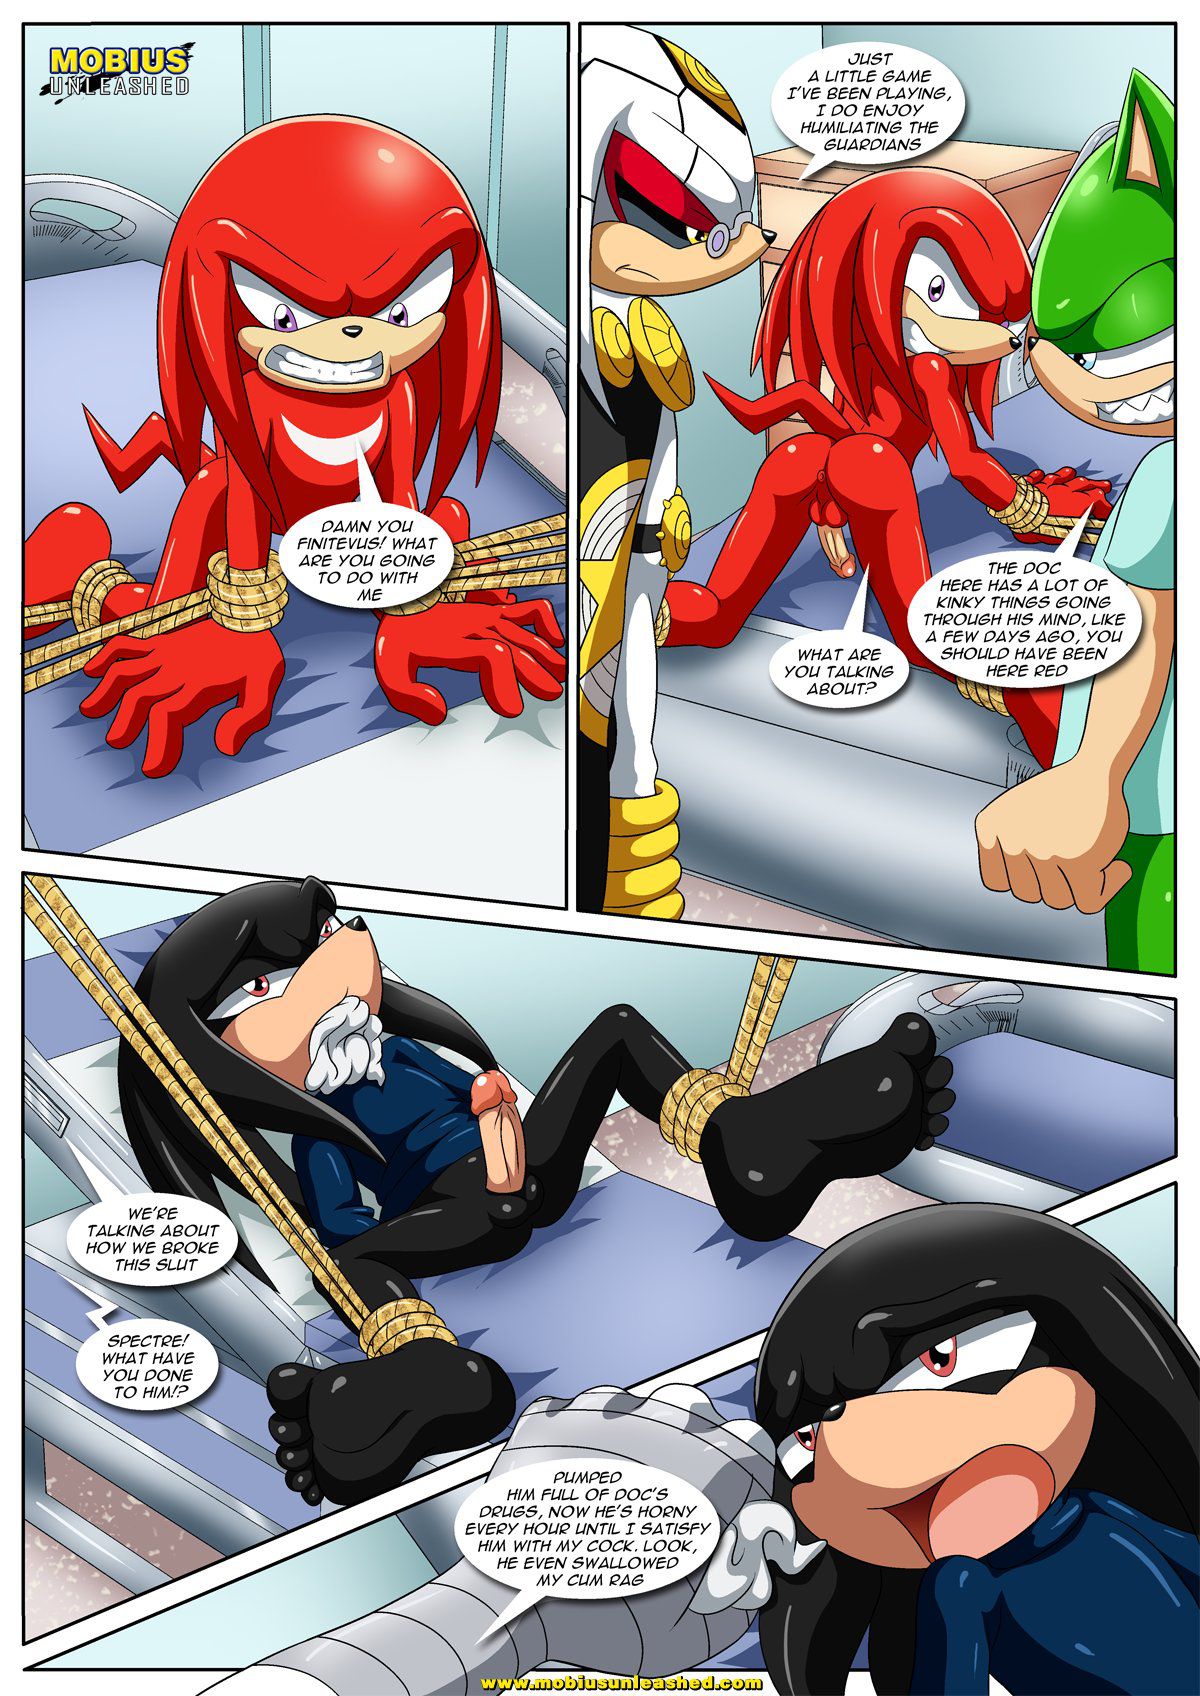 [Palcomix] The Doctor Will See You Now 2 (Sonic The Hedgehog) [Ongoing] 2